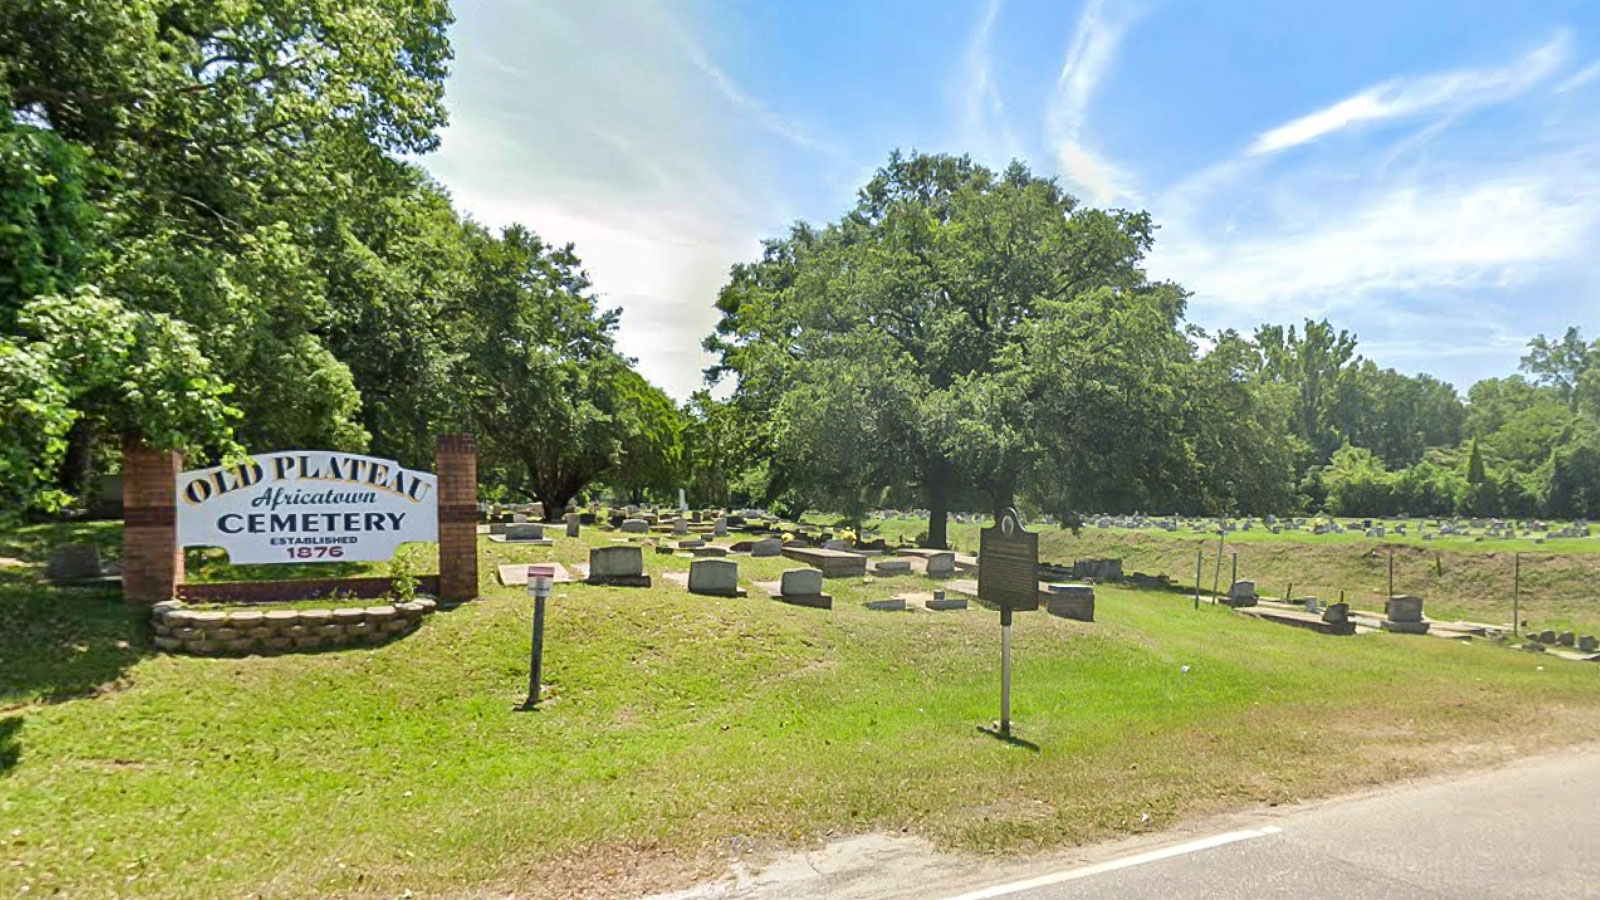 street view of Old Plateau Cemetery with sign and gravestones surrounded by trees